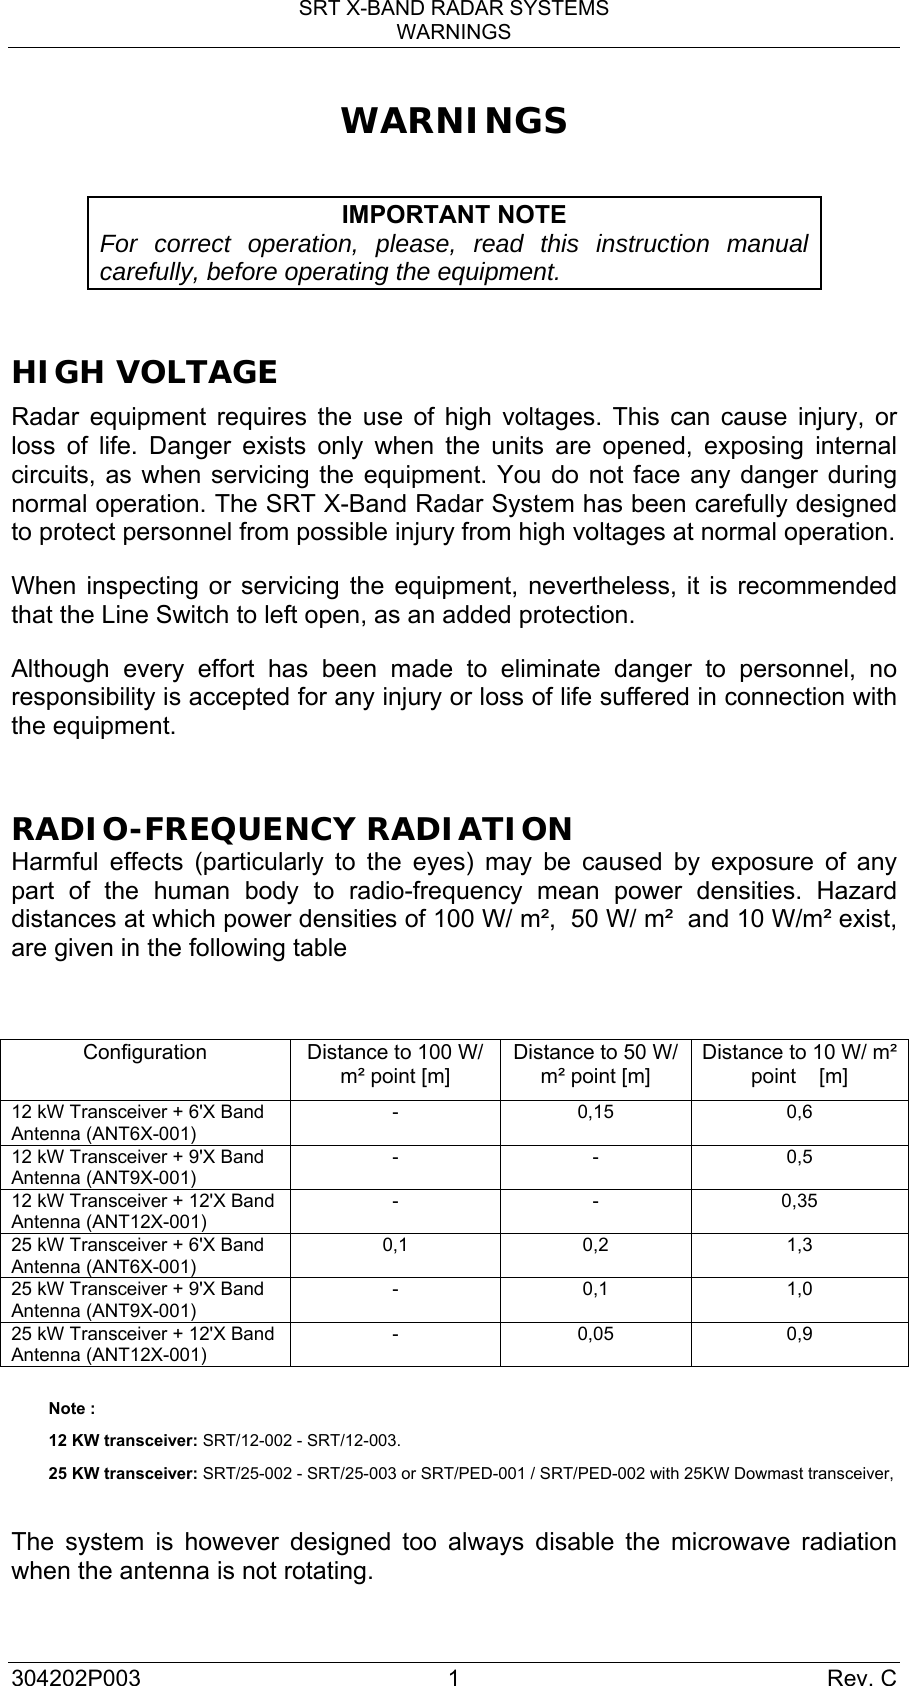 SRT X-BAND RADAR SYSTEMS WARNINGS 304202P003 1  Rev. C WARNINGS  IMPORTANT NOTE For correct operation, please, read this instruction manual carefully, before operating the equipment.  HIGH VOLTAGE Radar equipment requires the use of high voltages. This can cause injury, or loss of life. Danger exists only when the units are opened, exposing internal circuits, as when servicing the equipment. You do not face any danger during normal operation. The SRT X-Band Radar System has been carefully designed to protect personnel from possible injury from high voltages at normal operation. When inspecting or servicing the equipment, nevertheless, it is recommended that the Line Switch to left open, as an added protection. Although every effort has been made to eliminate danger to personnel, no responsibility is accepted for any injury or loss of life suffered in connection with the equipment.  RADIO-FREQUENCY RADIATION Harmful effects (particularly to the eyes) may be caused by exposure of any part of the human body to radio-frequency mean power densities. Hazard distances at which power densities of 100 W/ m²,  50 W/ m²  and 10 W/m² exist, are given in the following table   Configuration  Distance to 100 W/ m² point [m] Distance to 50 W/ m² point [m] Distance to 10 W/ m² point    [m] 12 kW Transceiver + 6&apos;X Band Antenna (ANT6X-001) - 0,15 0,6 12 kW Transceiver + 9&apos;X Band Antenna (ANT9X-001) - - 0,5 12 kW Transceiver + 12&apos;X Band Antenna (ANT12X-001) - - 0,35 25 kW Transceiver + 6&apos;X Band Antenna (ANT6X-001) 0,1 0,2  1,3 25 kW Transceiver + 9&apos;X Band Antenna (ANT9X-001) - 0,1 1,0 25 kW Transceiver + 12&apos;X Band Antenna (ANT12X-001) - 0,05 0,9  Note : 12 KW transceiver: SRT/12-002 - SRT/12-003.  25 KW transceiver: SRT/25-002 - SRT/25-003 or SRT/PED-001 / SRT/PED-002 with 25KW Dowmast transceiver,  The system is however designed too always disable the microwave radiation when the antenna is not rotating. 